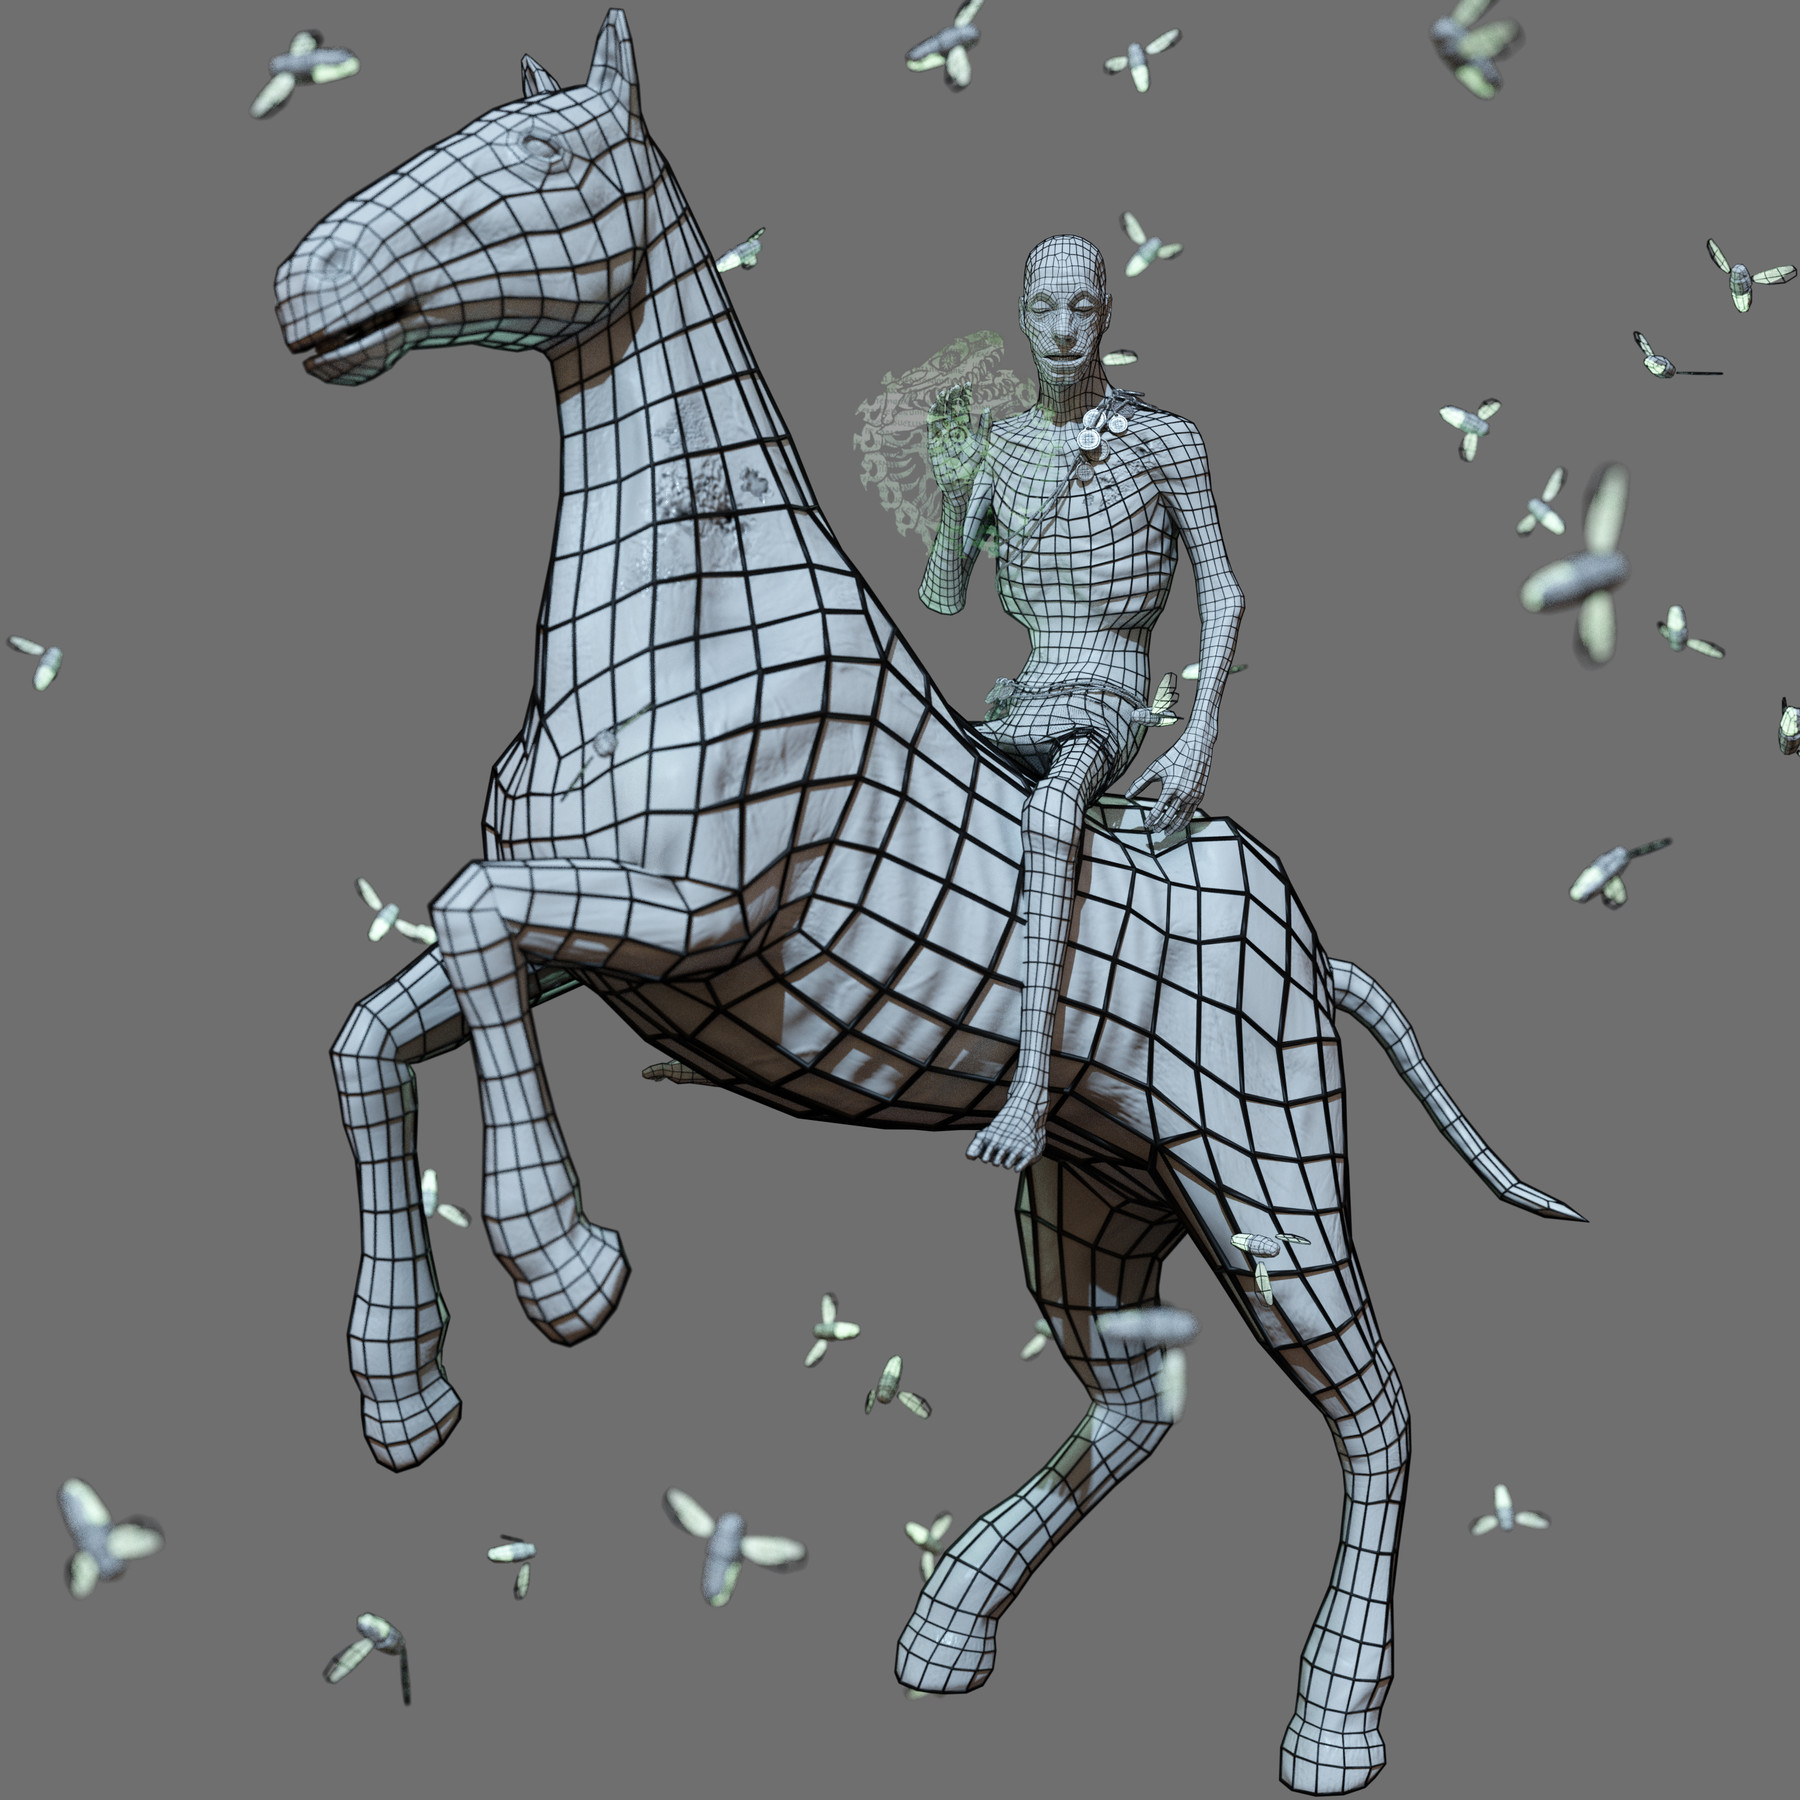 ArtStation - A horse! A horse! My kingdom for a horse!